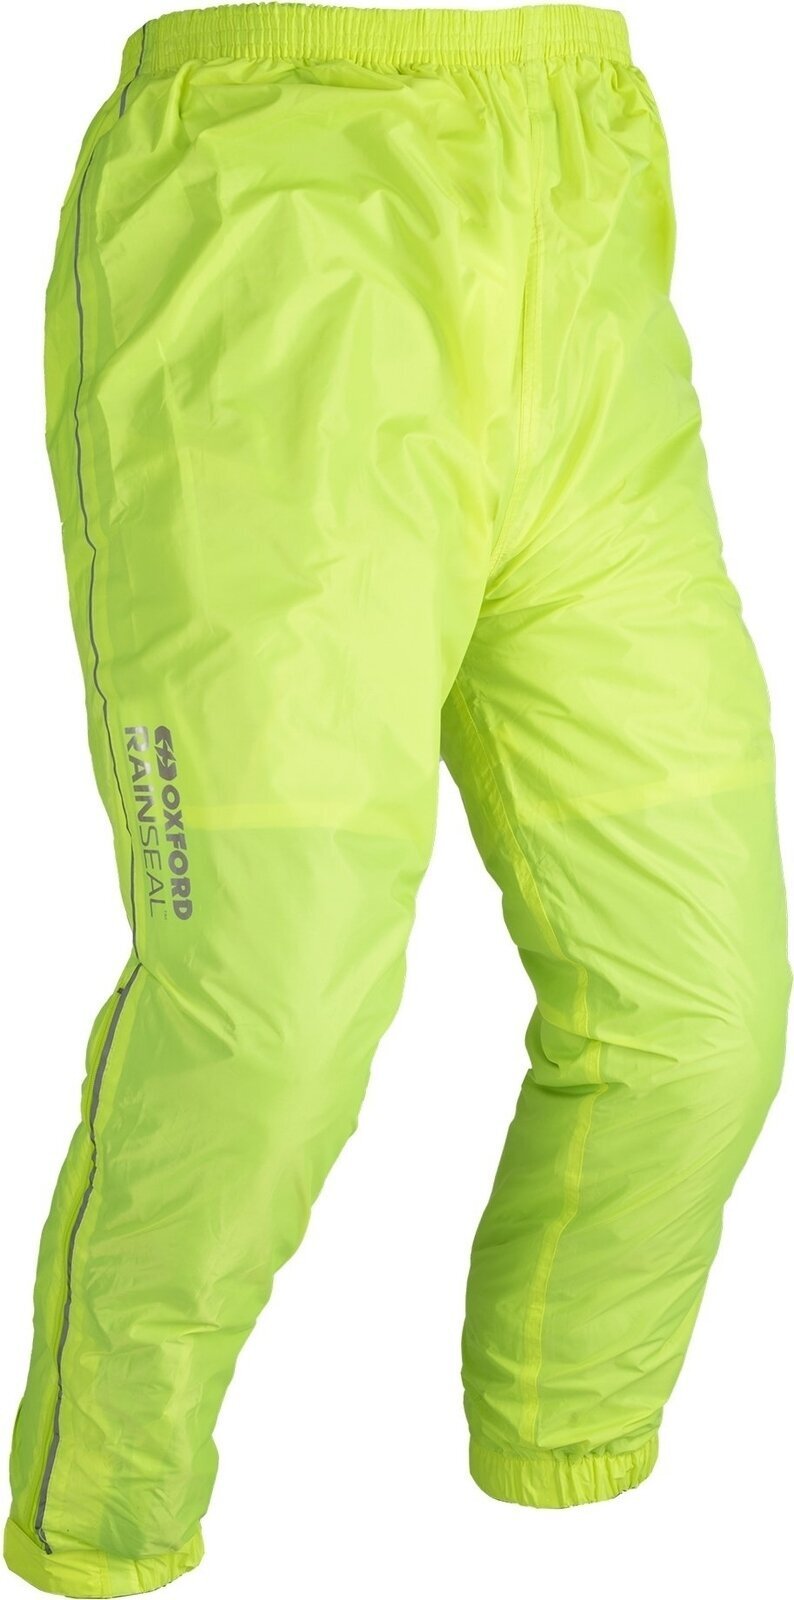 Motorcycle Rain Pants Oxford Rainseal Over Trousers Fluo L